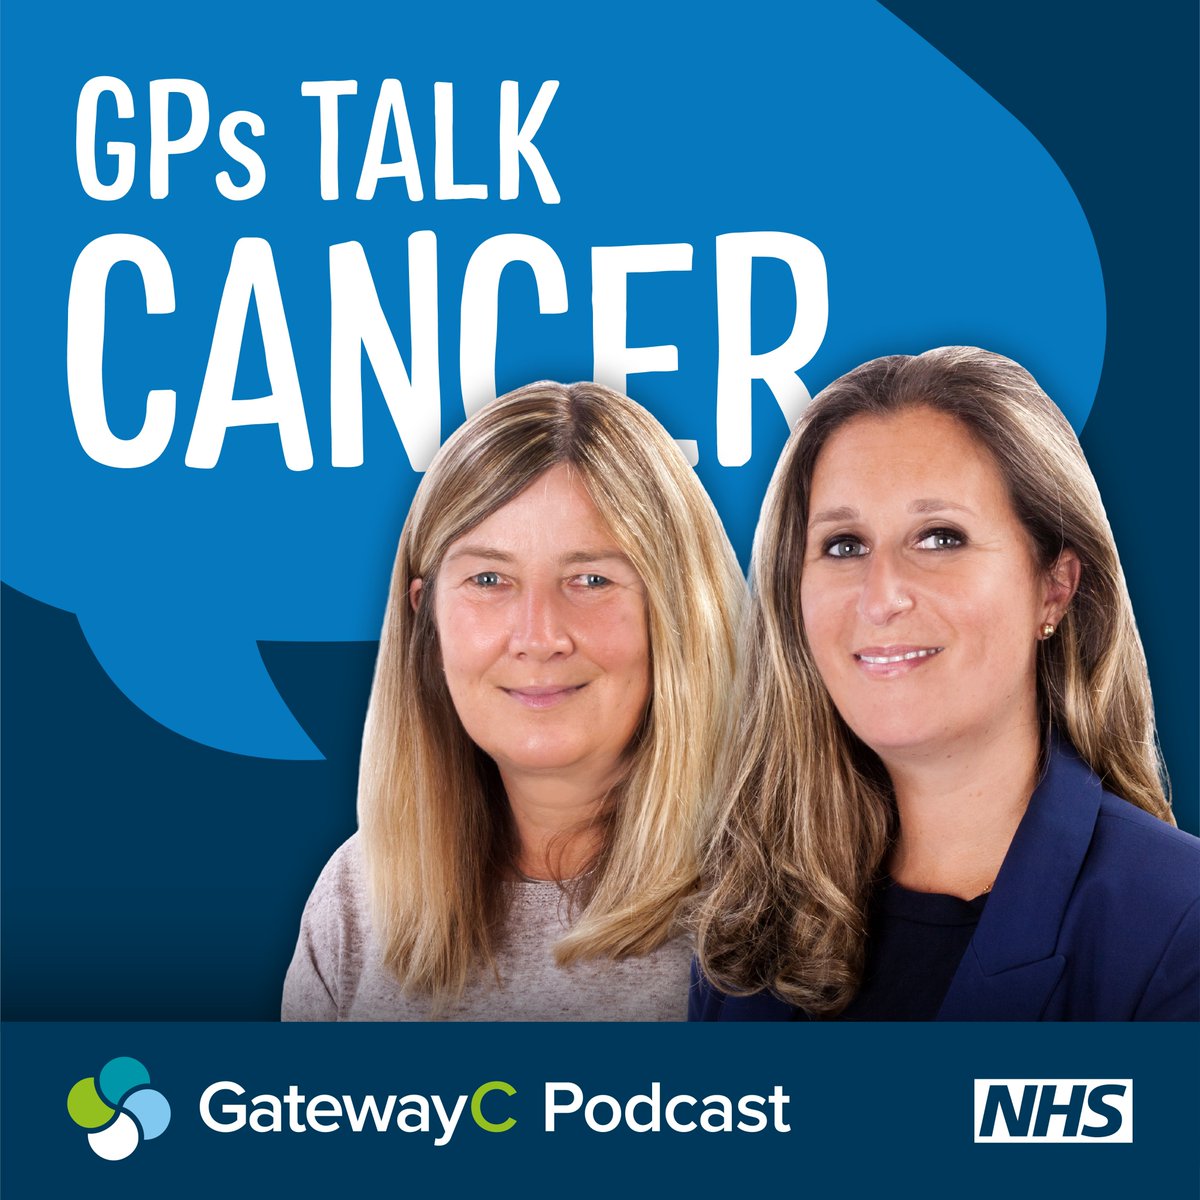 We are excited to launch our new podcast series GPs Talk Cancer tomorrow! 🎙️ Read our latest blog post on what you can expect from this series. 📰bit.ly/44tamxg